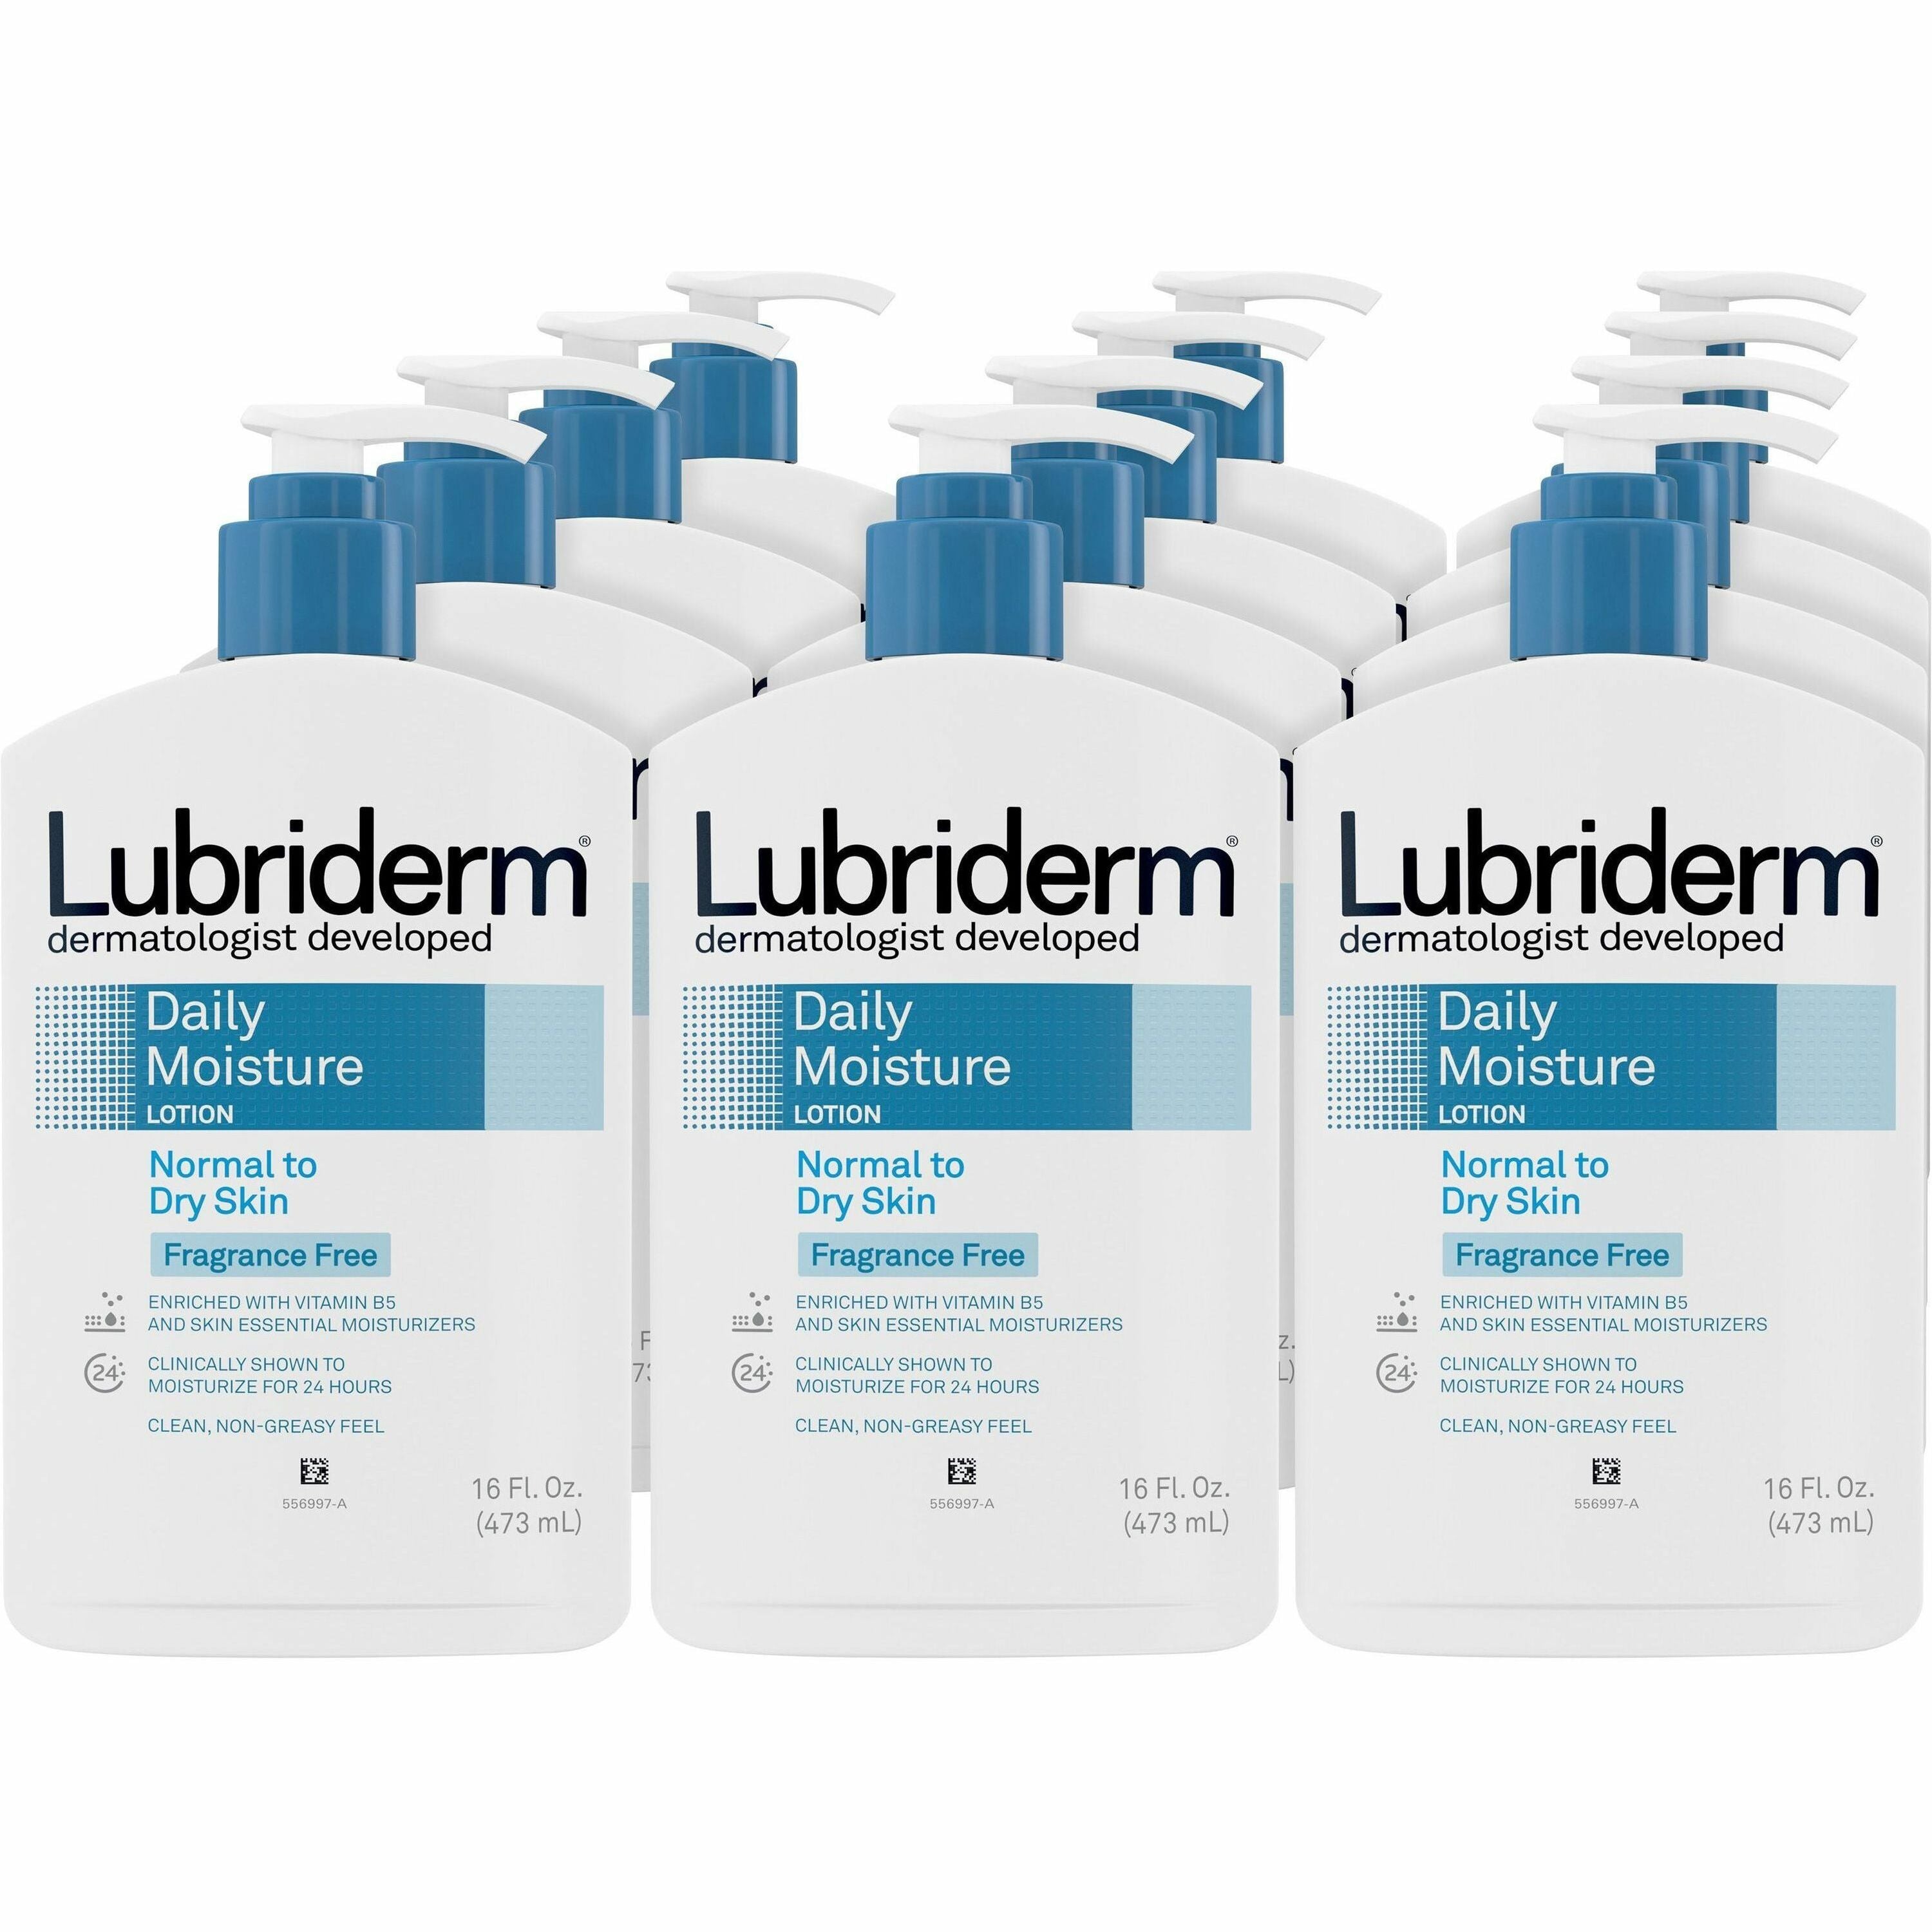 lubriderm-daily-moisture-lotion-lotion-16-fl-oz-for-dry-normal-skin-applicable-on-body-moisturising-non-greasy-fragrance-free-absorbs-quickly-12-carton_joj48323ct - 1